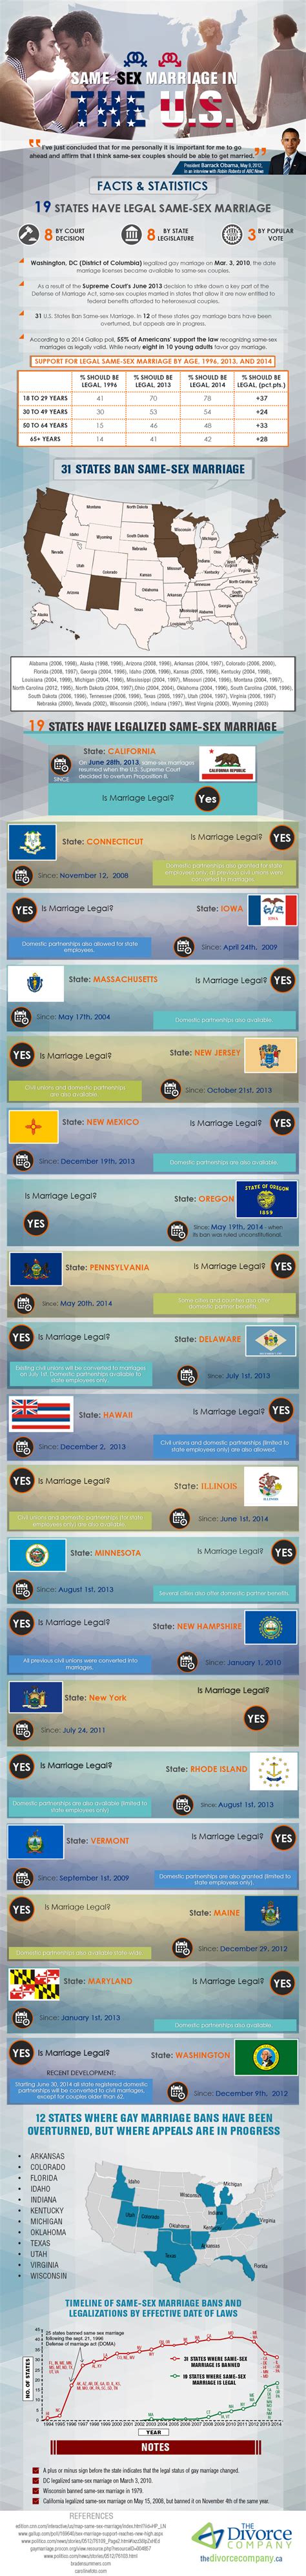 Same Sex Marriage In The U S [infographic]